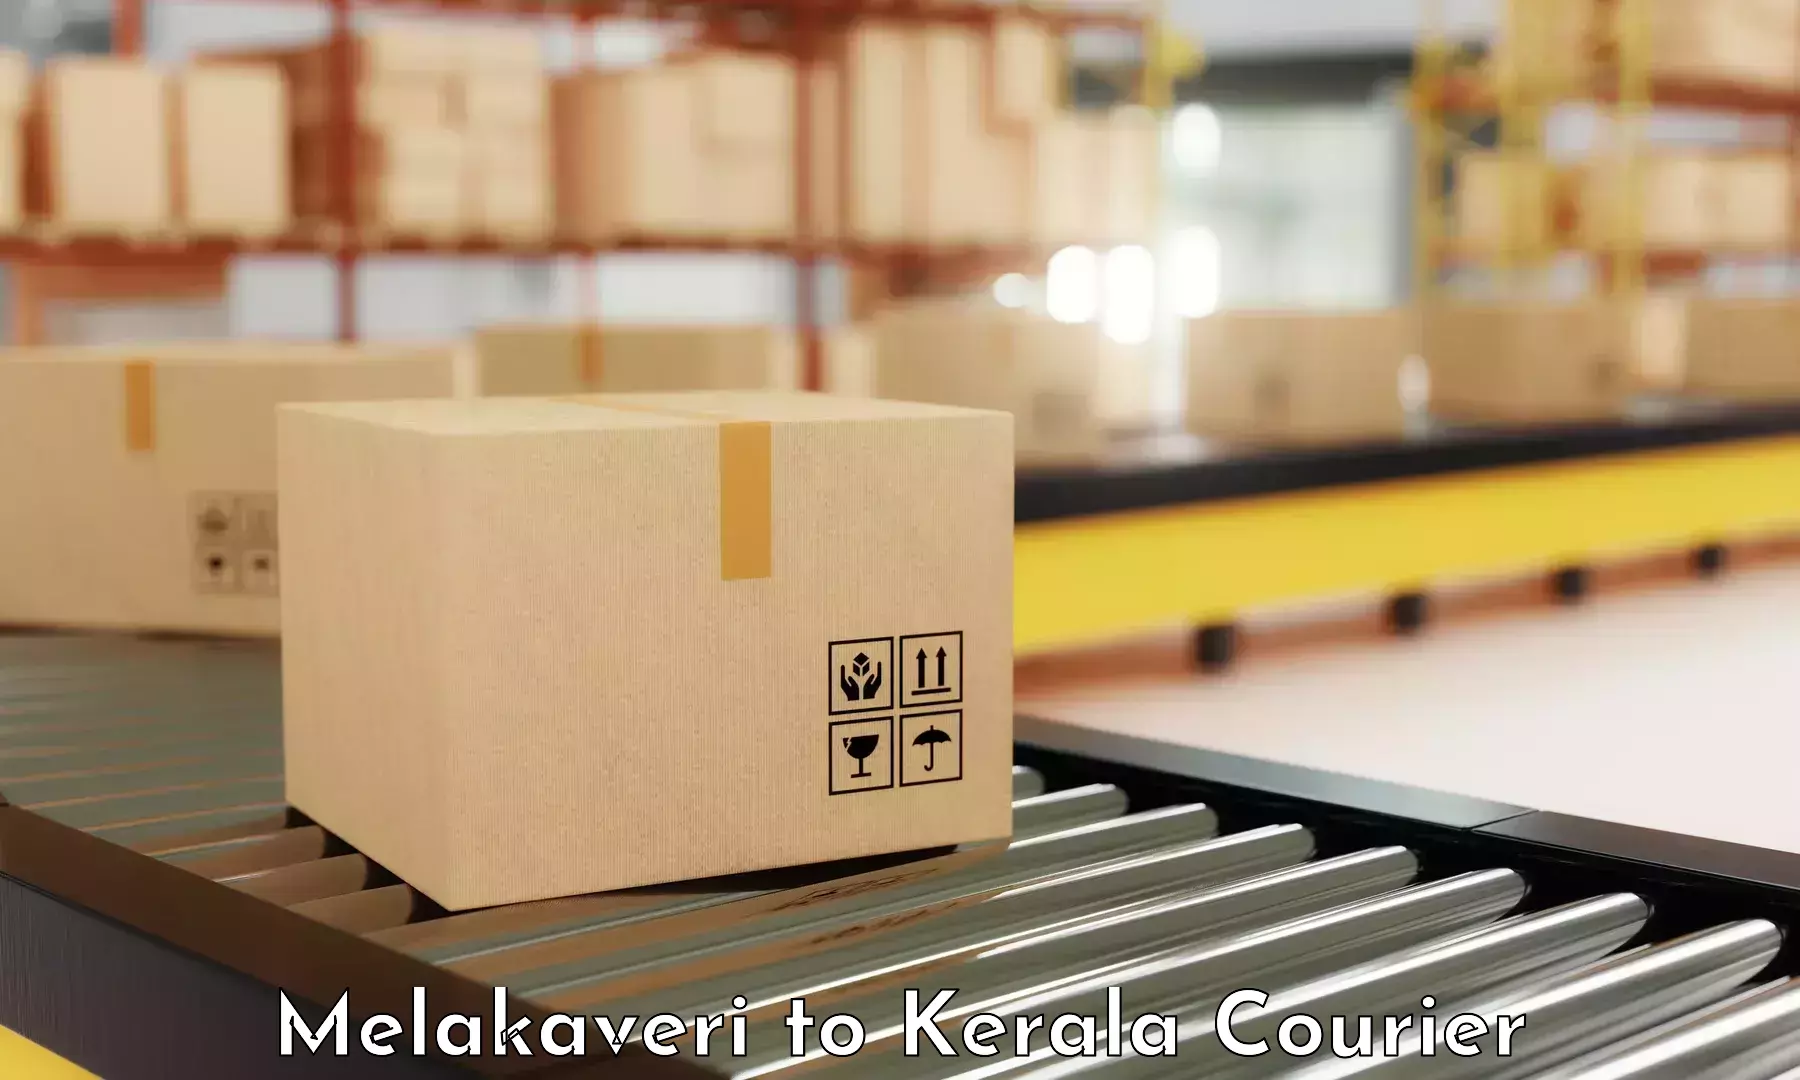 24/7 courier service Melakaveri to Chalakudy